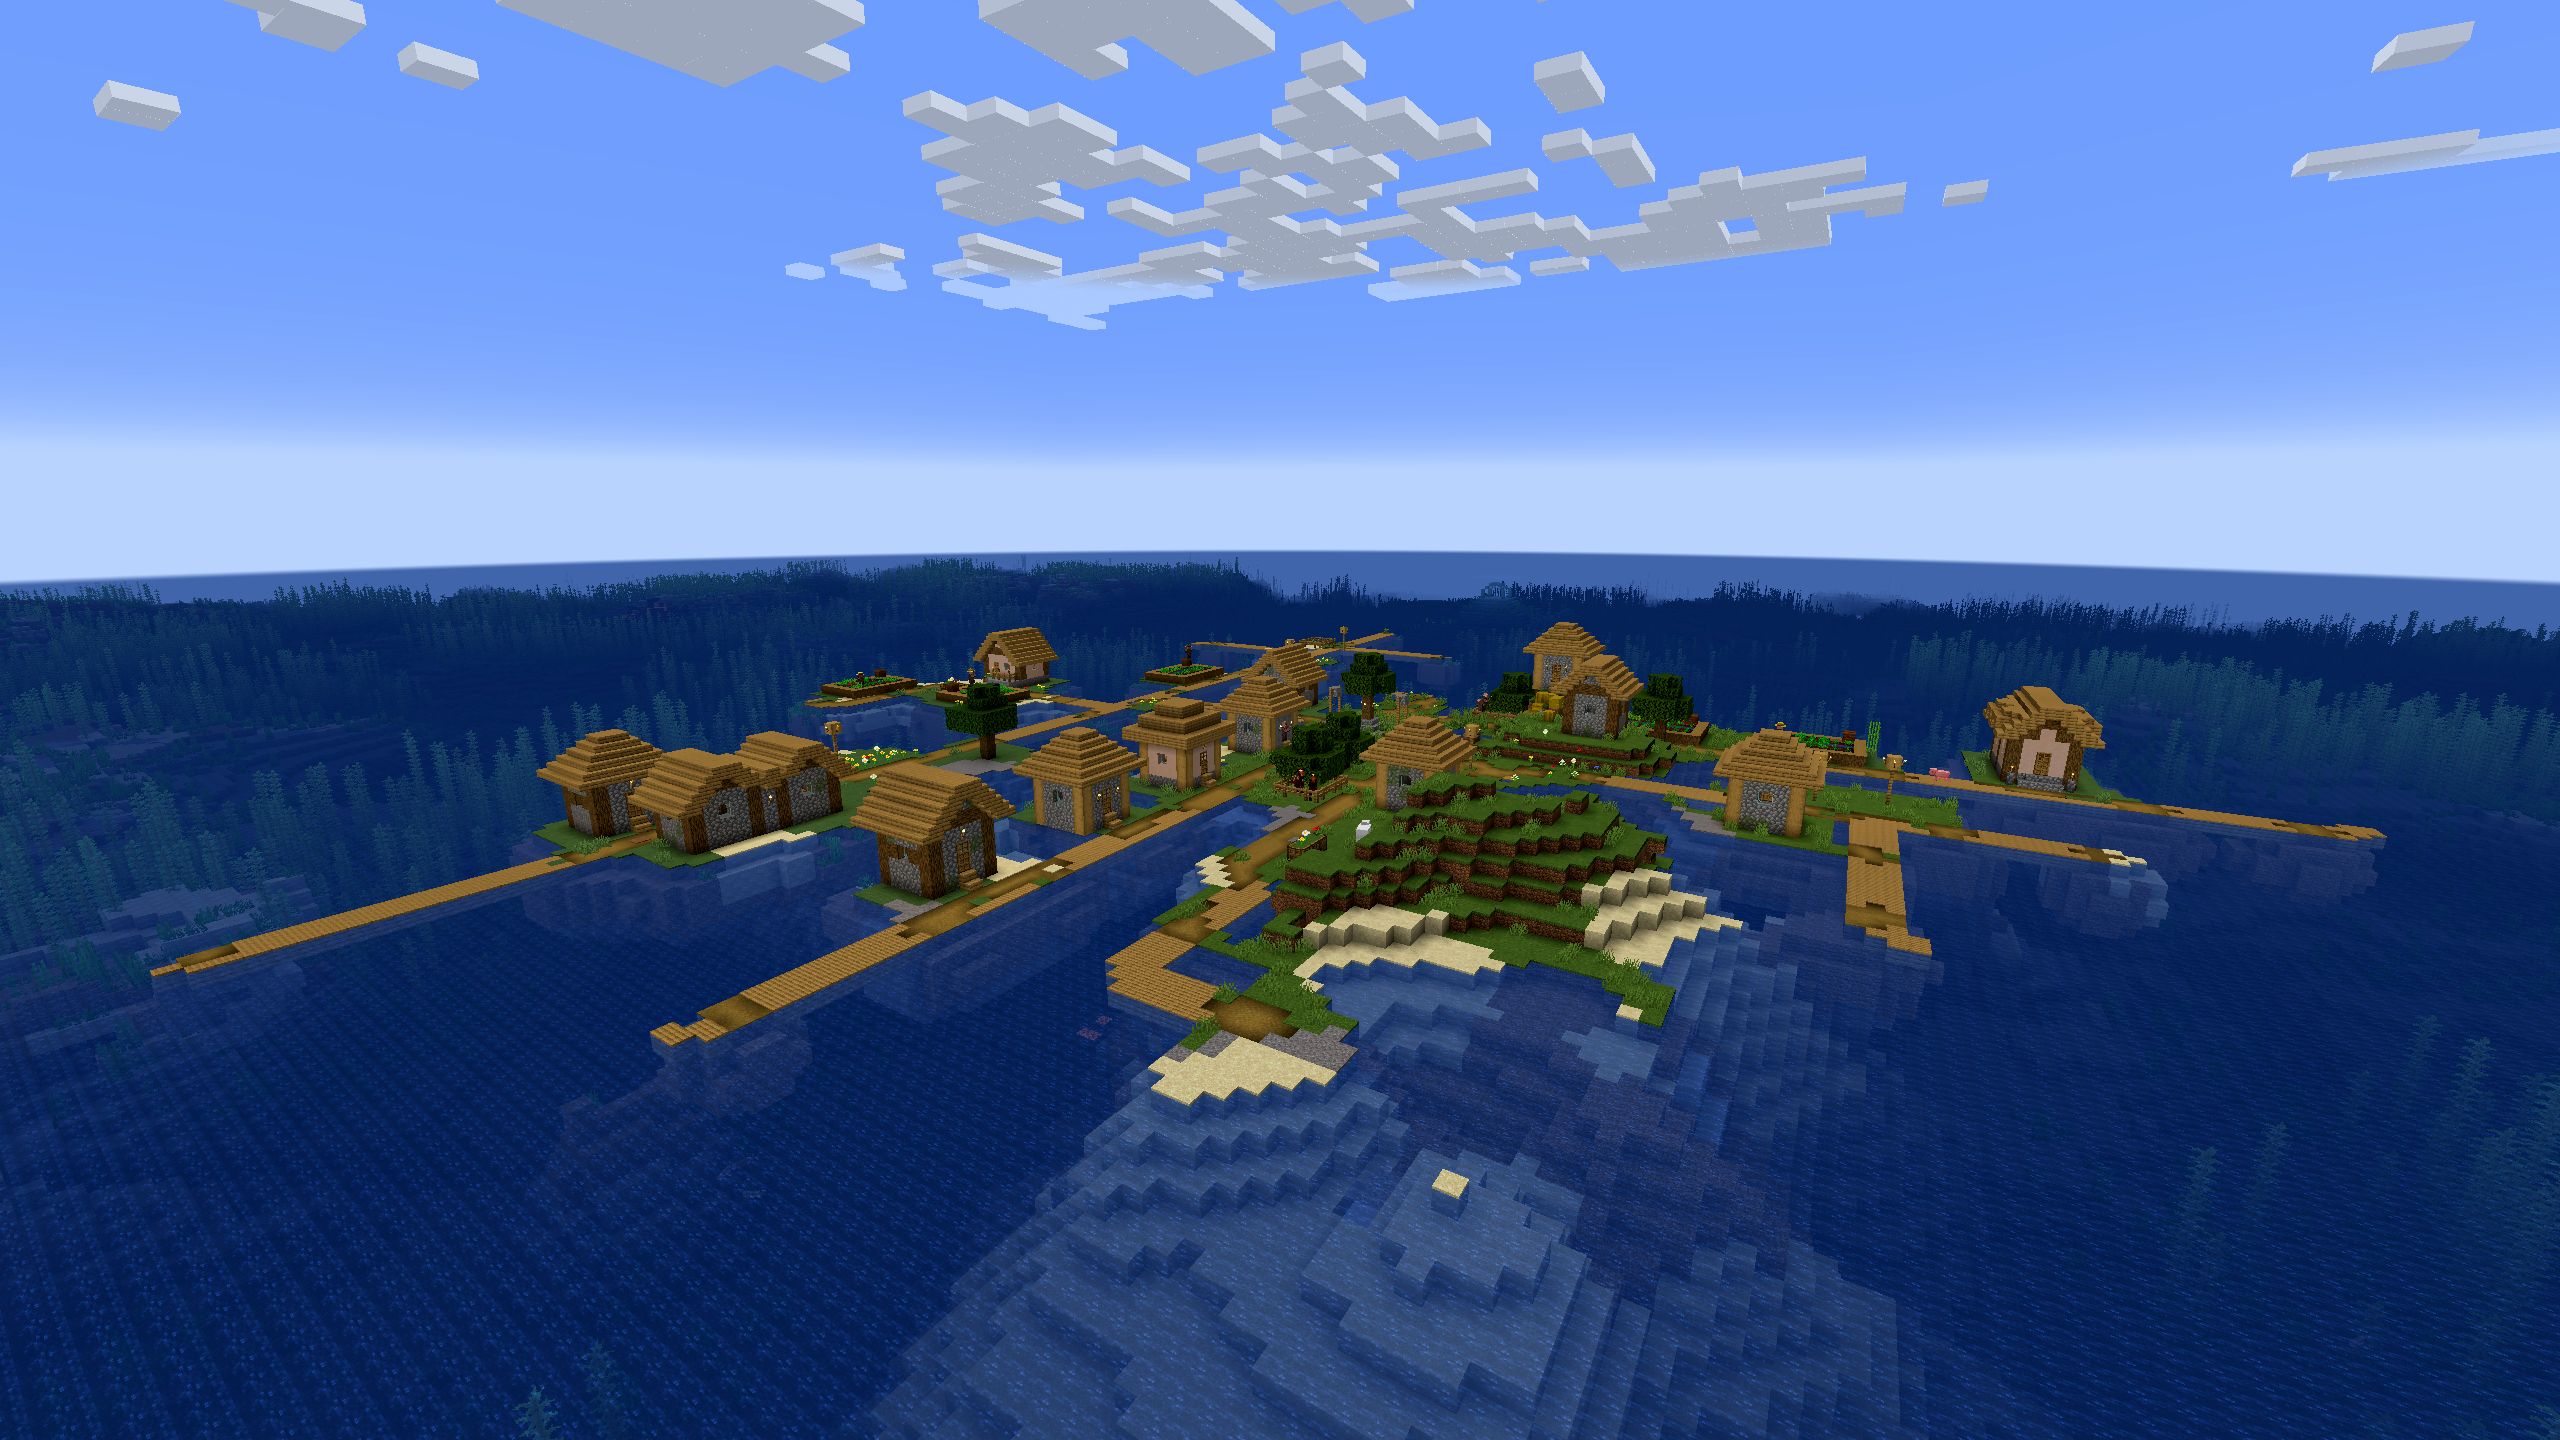 Minecraft Java Edition Village Floating In The Middle Of The Ocean